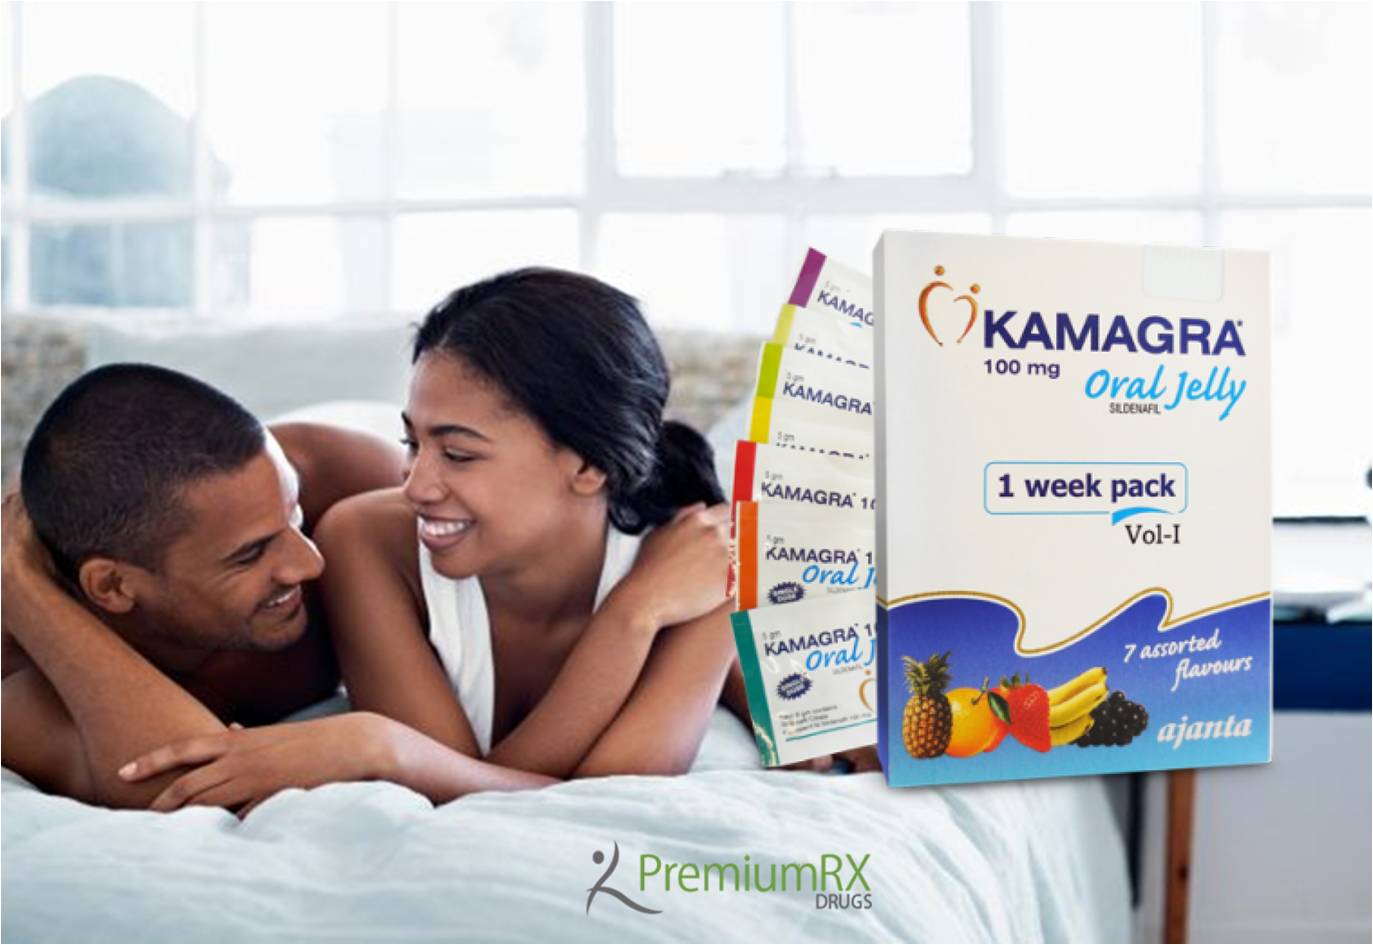 How to use Kamagra Oral Jelly